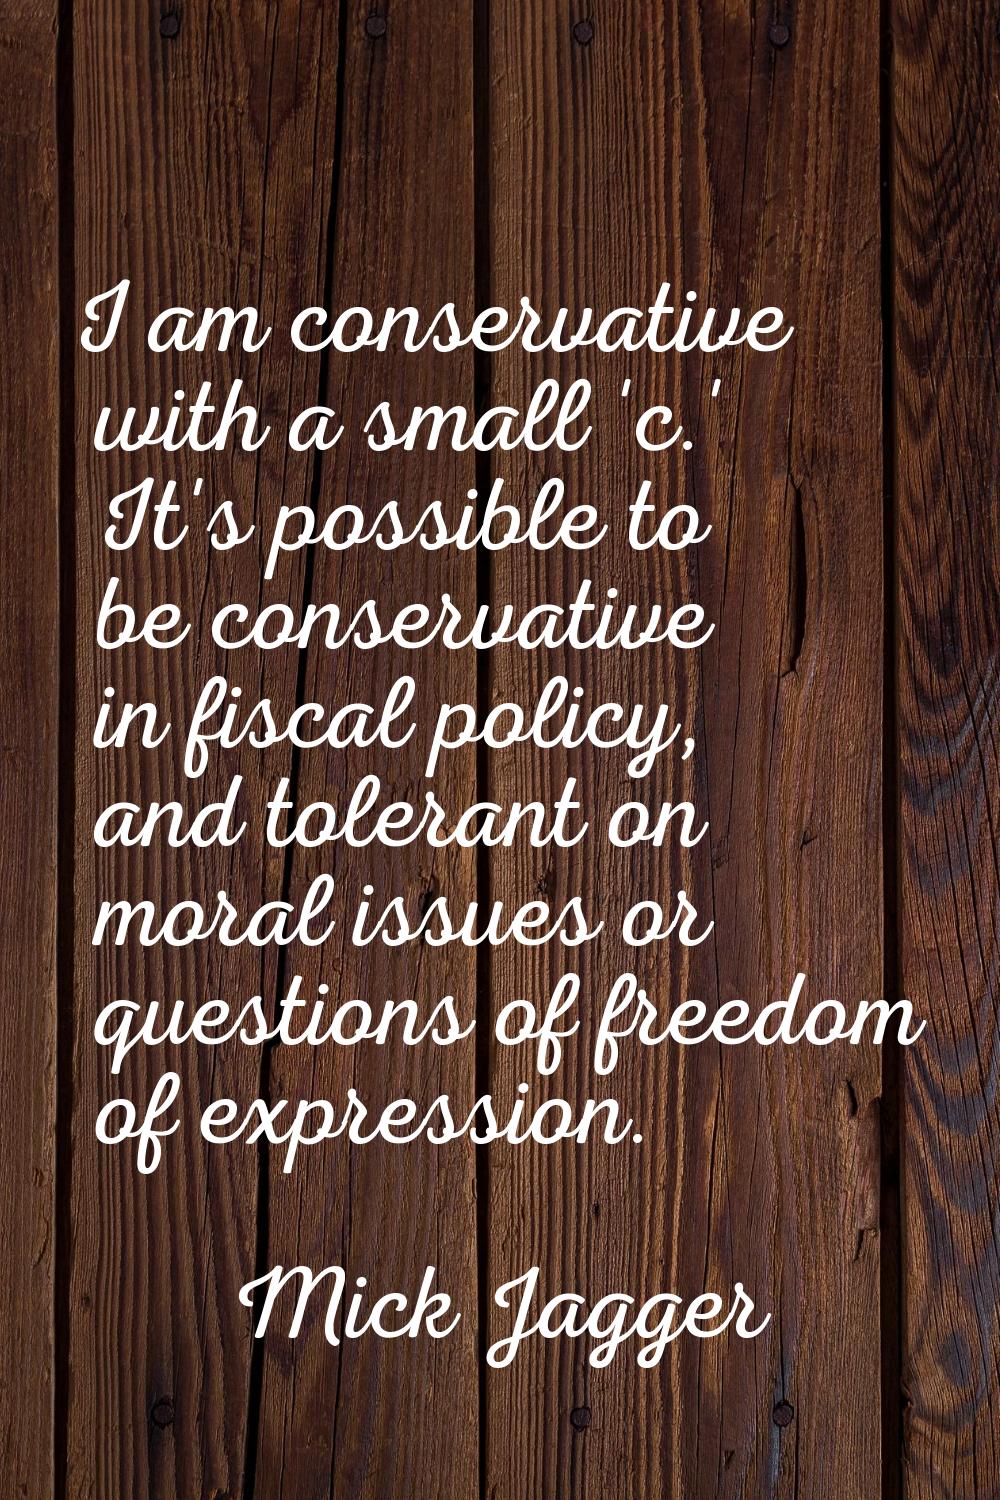 I am conservative with a small 'c.' It's possible to be conservative in fiscal policy, and tolerant